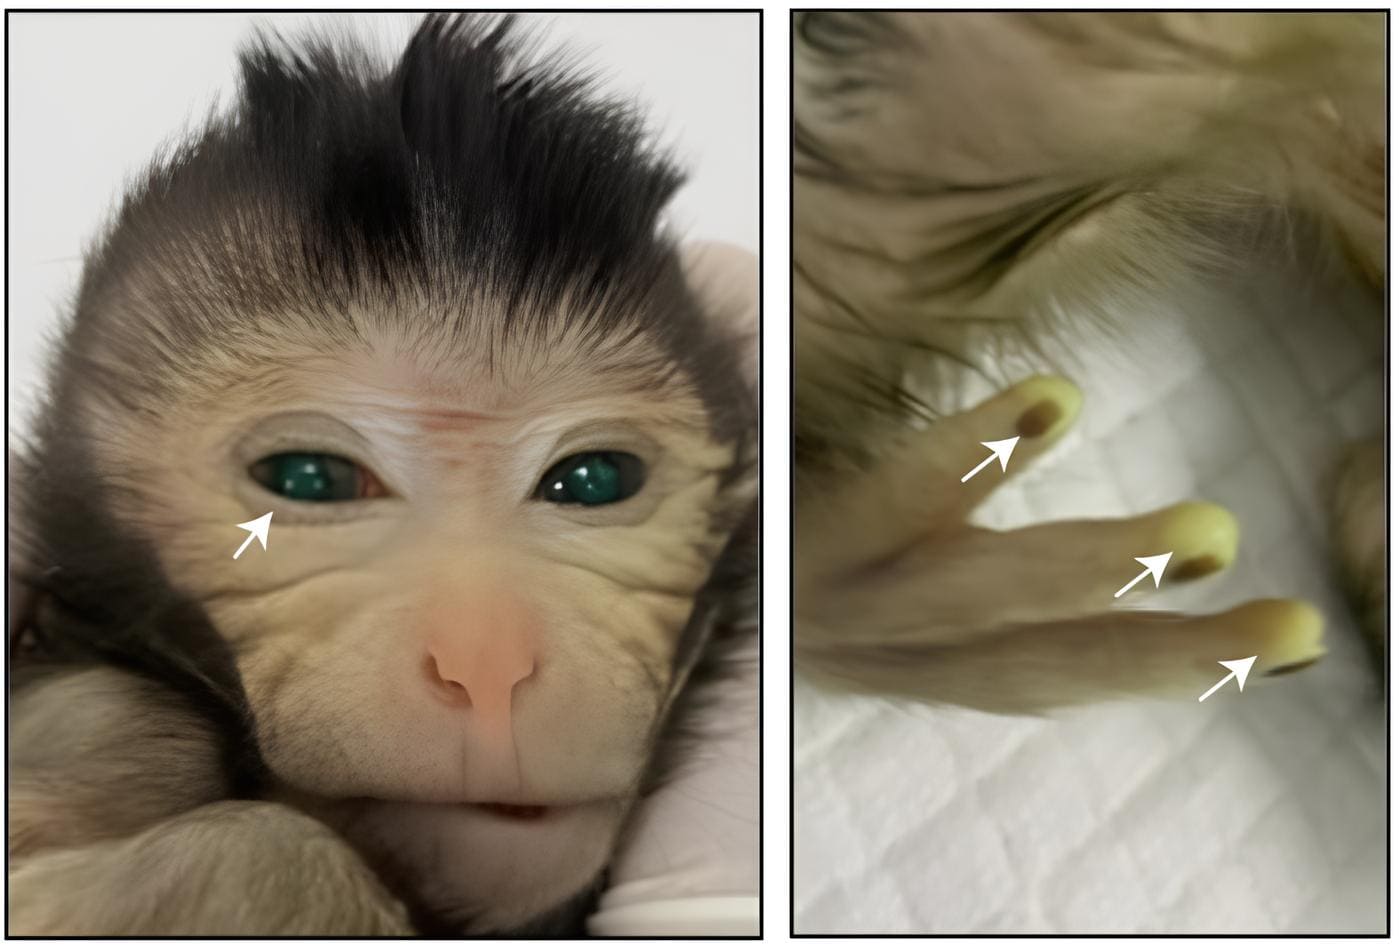 'Chimaera' Monkey With Glowing Fingertips and Eyes